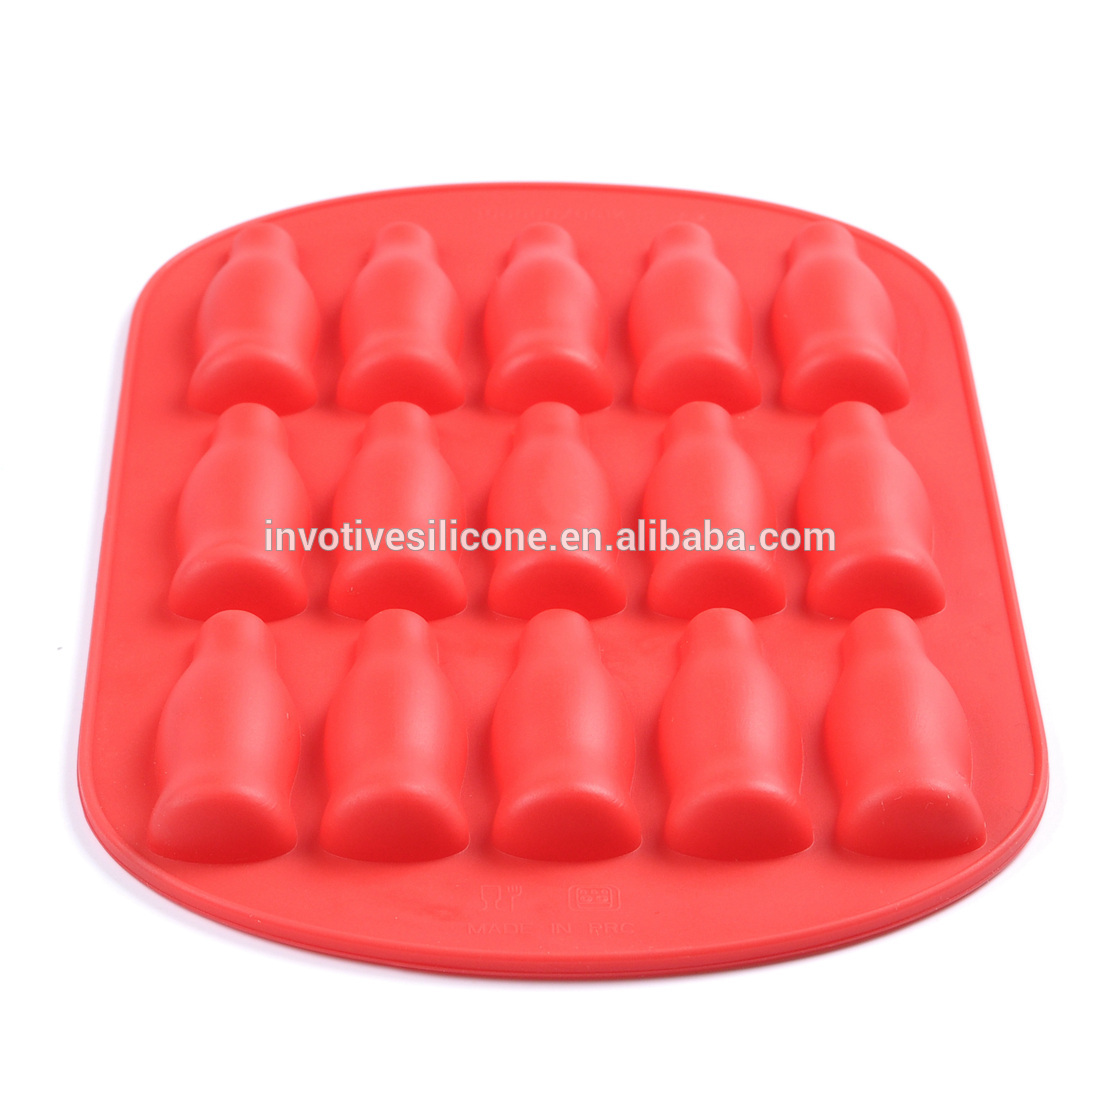 BSCI Factory Food grade bottle shape silicone ice cube trays ice mold for promotional gift